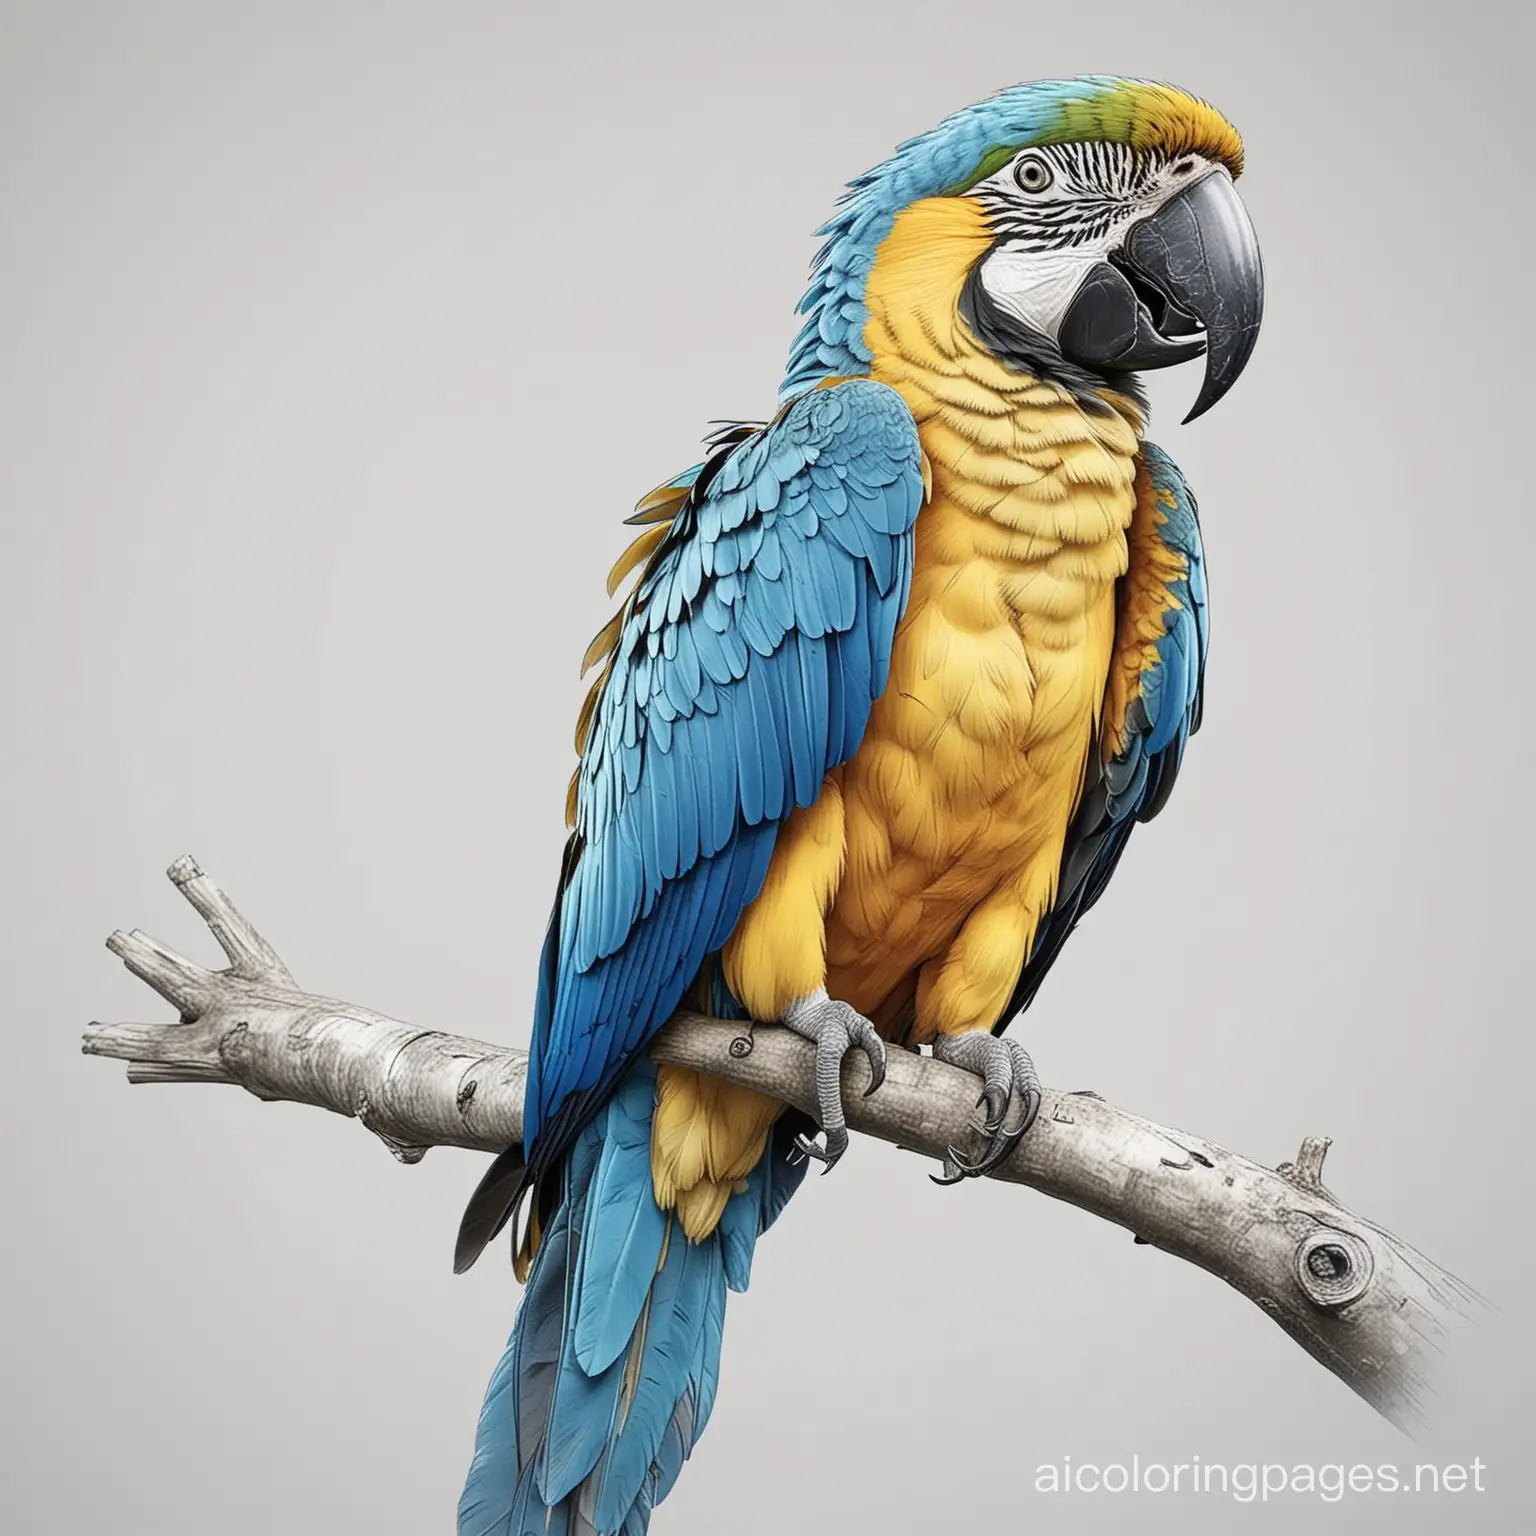 realistic blue and yellow macaw sat on a tree branch, Coloring Page, black and white, line art, white background, Simplicity, Ample White Space. The background of the coloring page is plain white to make it easy for young children to color within the lines. The outlines of all the subjects are easy to distinguish, making it simple for kids to color without too much difficulty